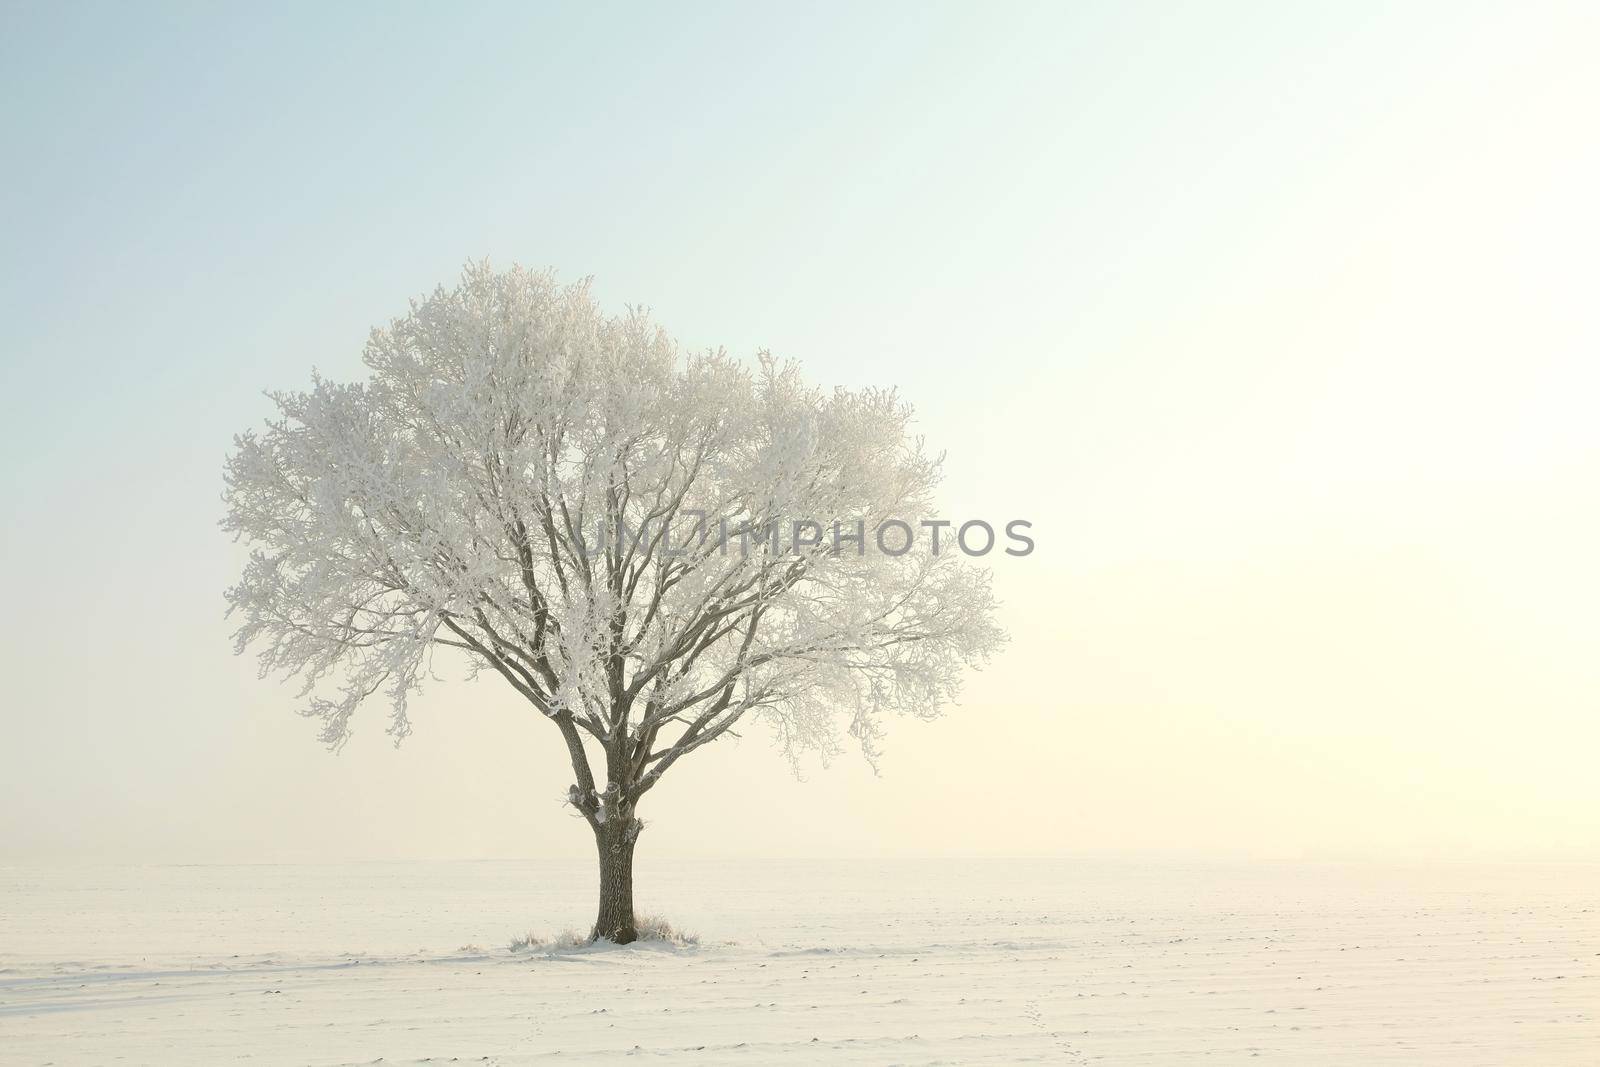 Frosty winter tree against a blue sky at dawn.